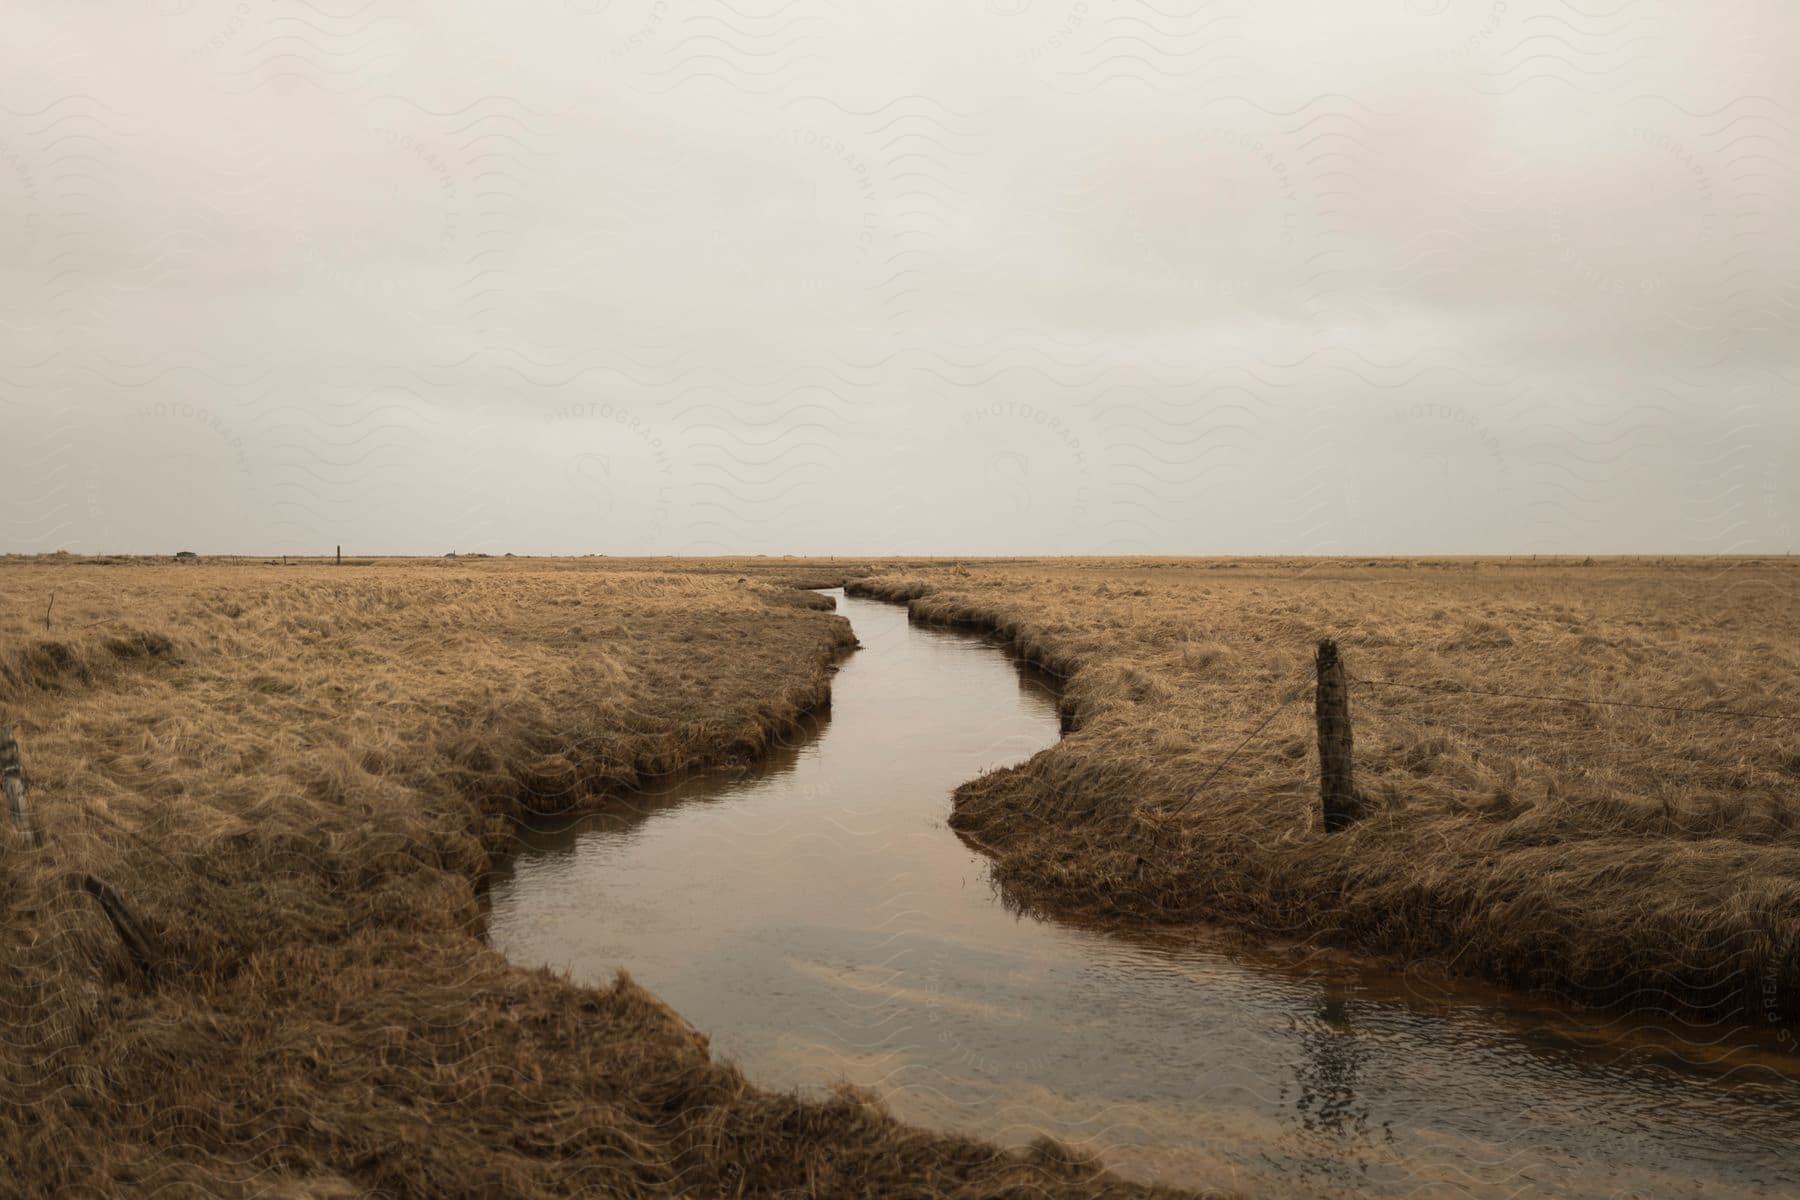 A stream flows through a dry field on a cloudy day providing relief to the parched landscape